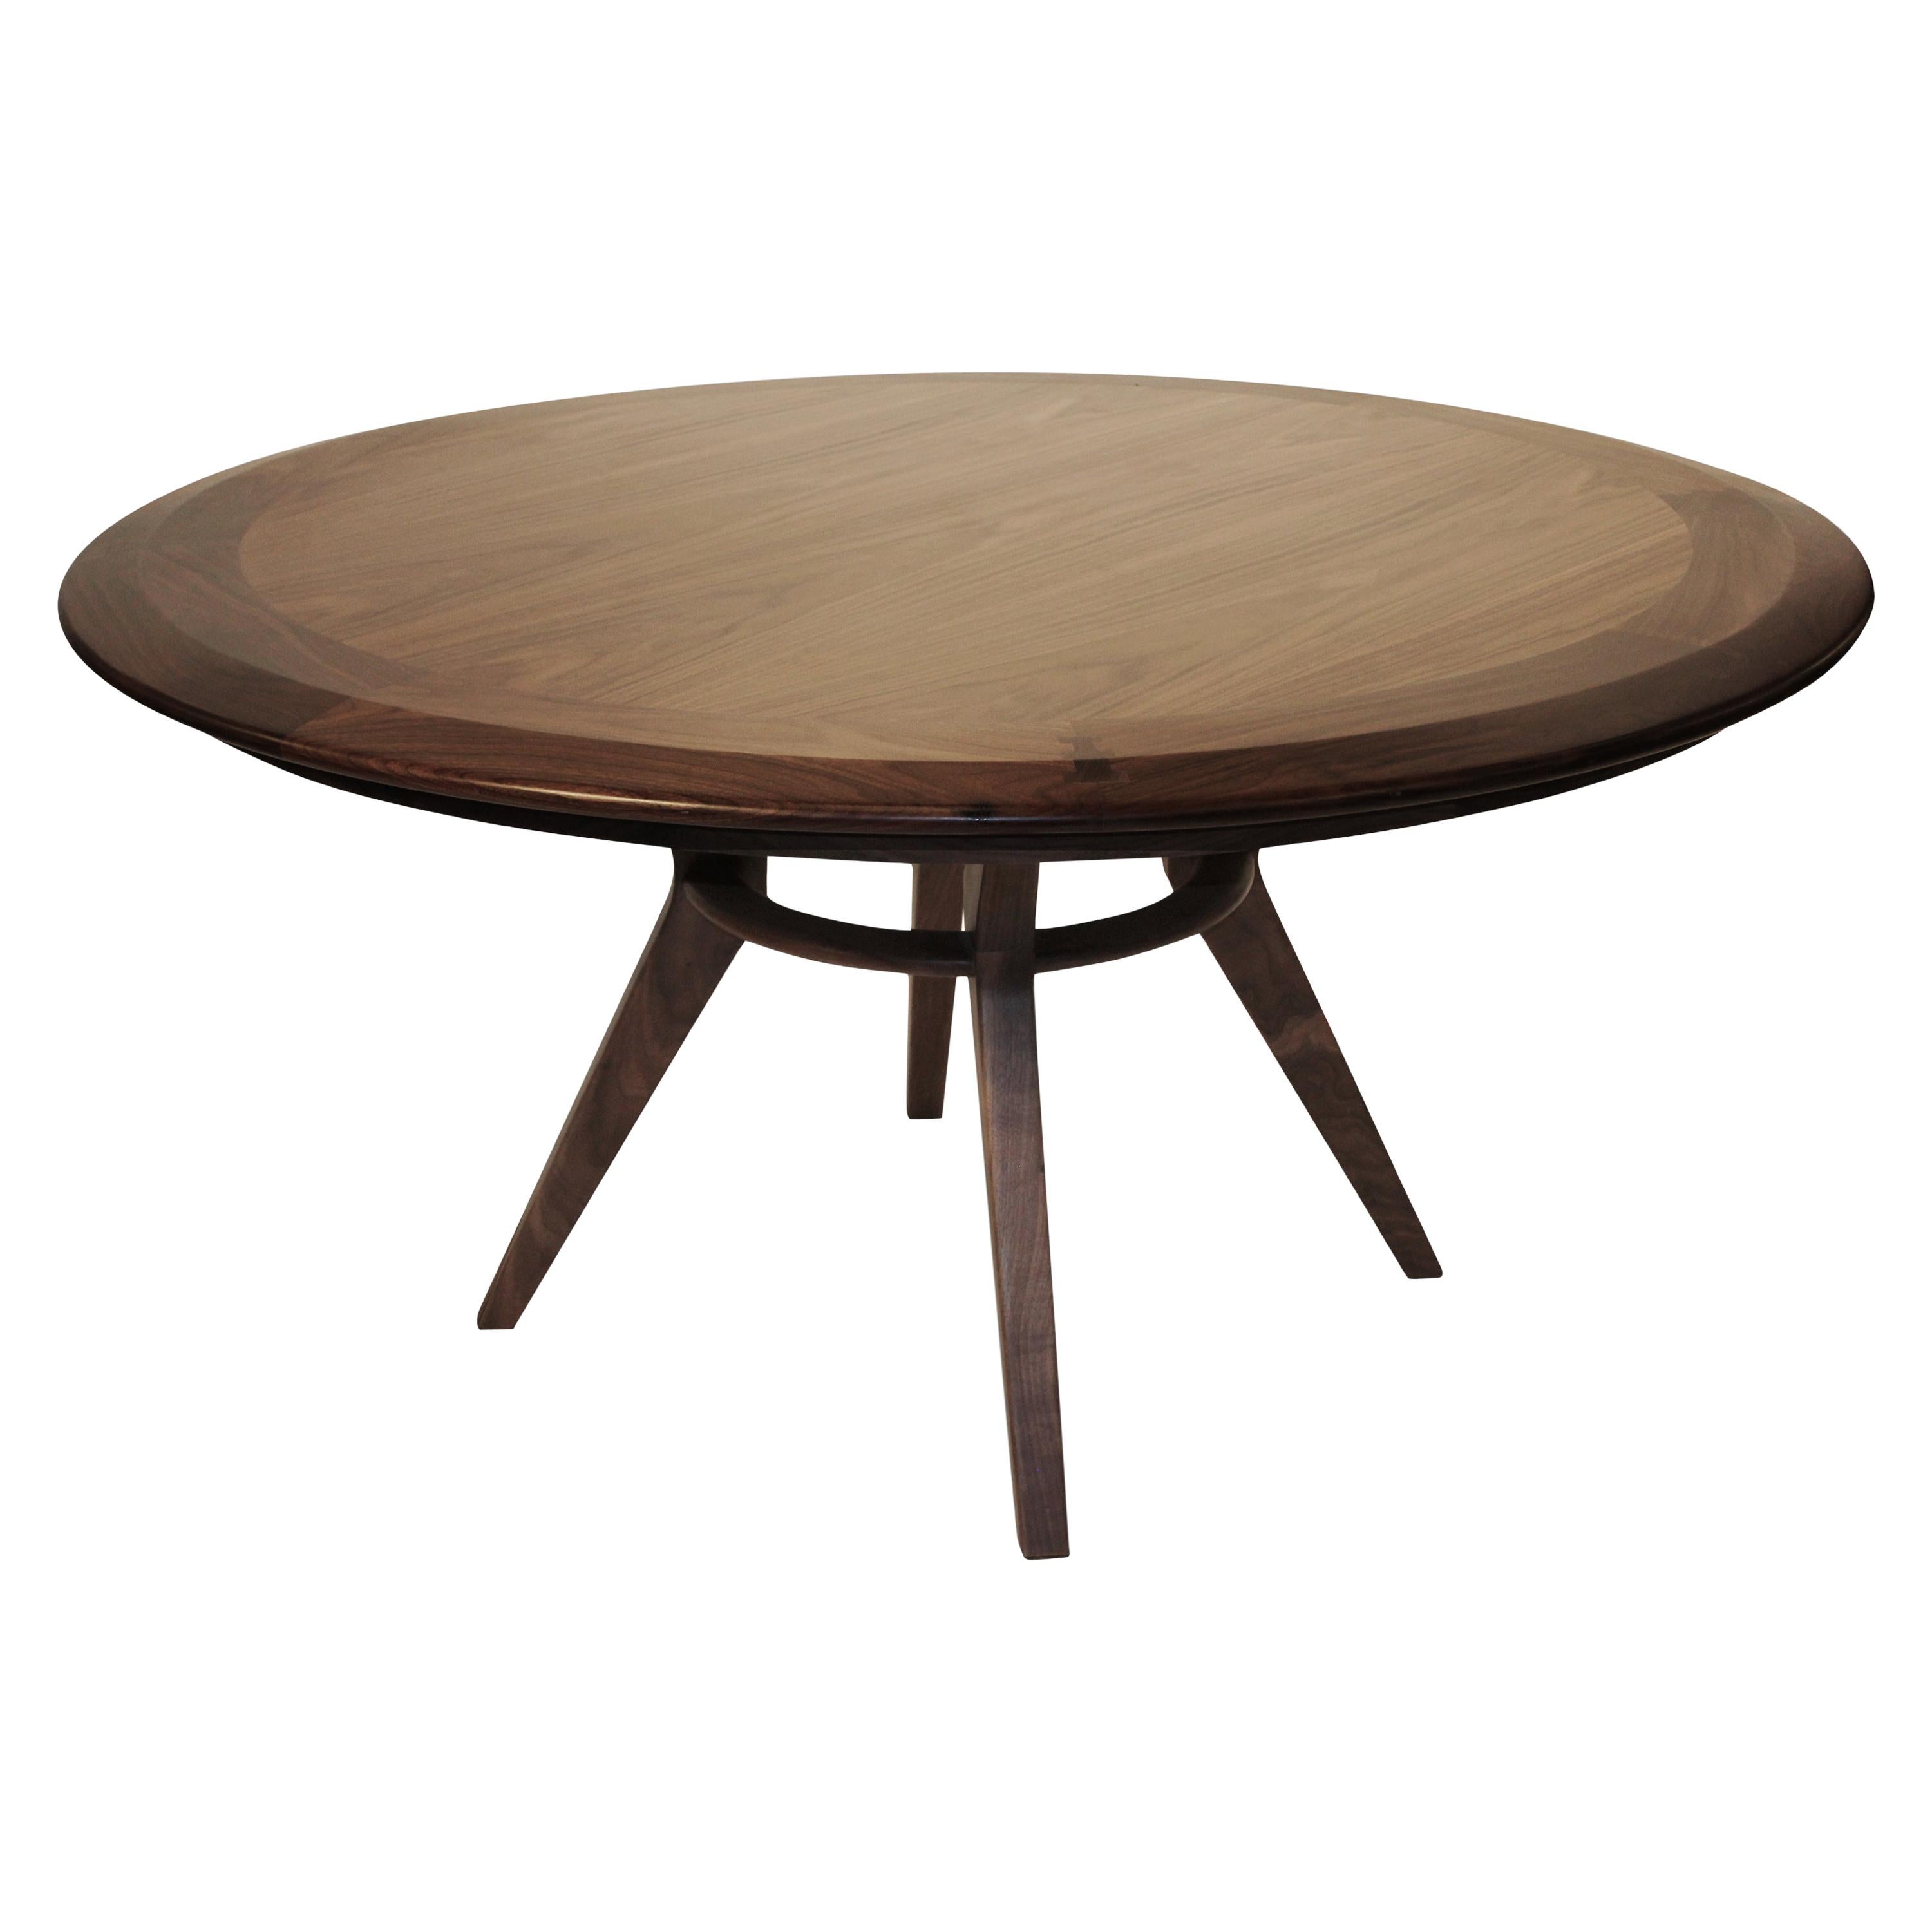  Boomerang, Modern Solid Walnut Wood Round, 6 Seat Dining Table 